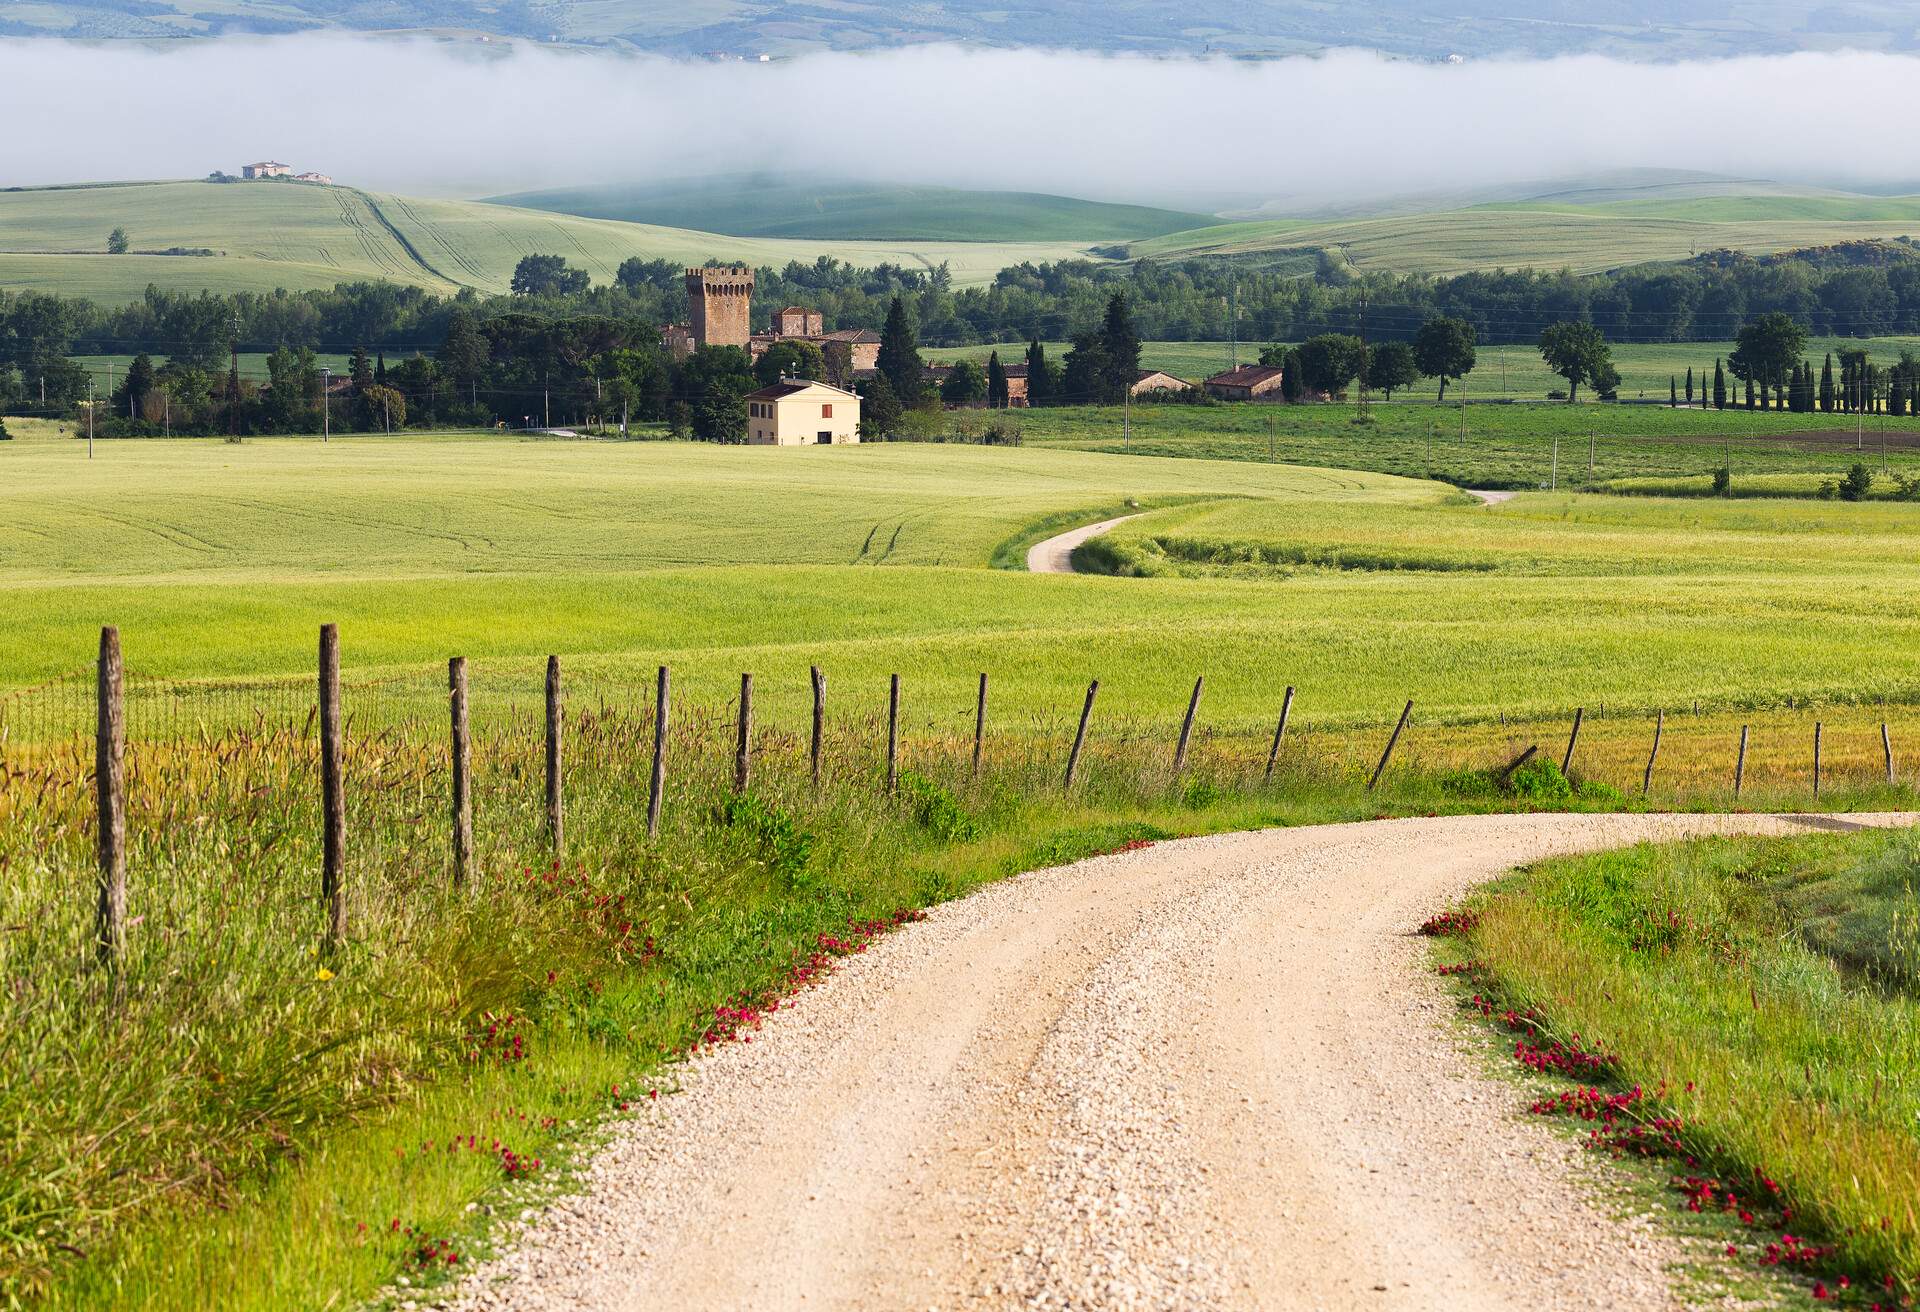 DEST_ITALY_THEME_TUSCAN-COUNTRYSIDE-TRAVEL-GettyImages-651337762